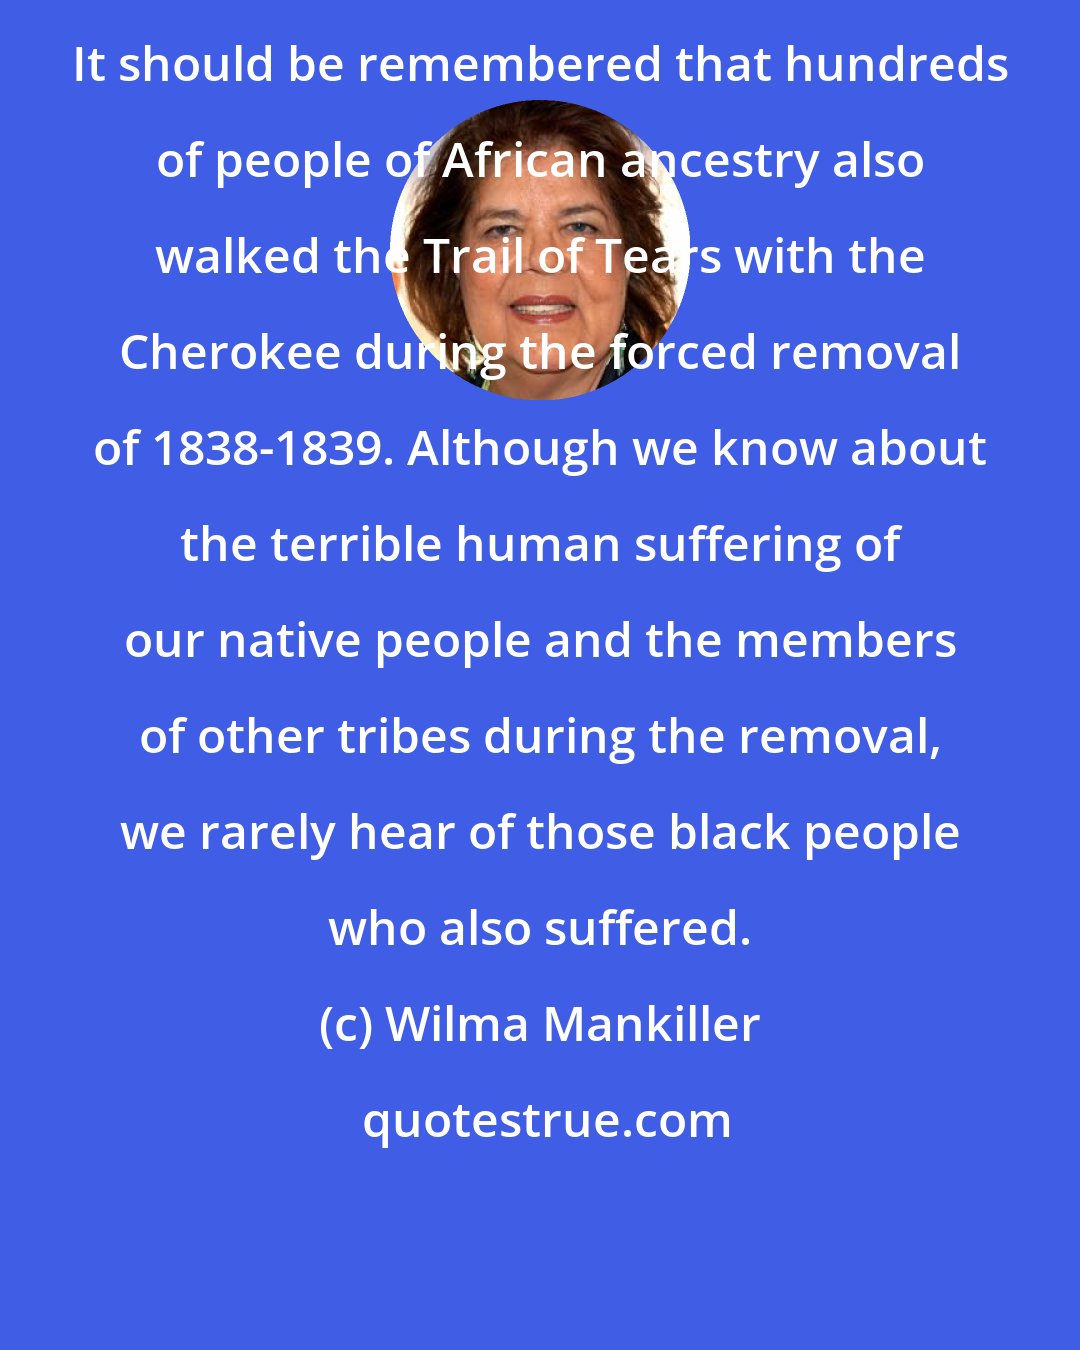 Wilma Mankiller: It should be remembered that hundreds of people of African ancestry also walked the Trail of Tears with the Cherokee during the forced removal of 1838-1839. Although we know about the terrible human suffering of our native people and the members of other tribes during the removal, we rarely hear of those black people who also suffered.